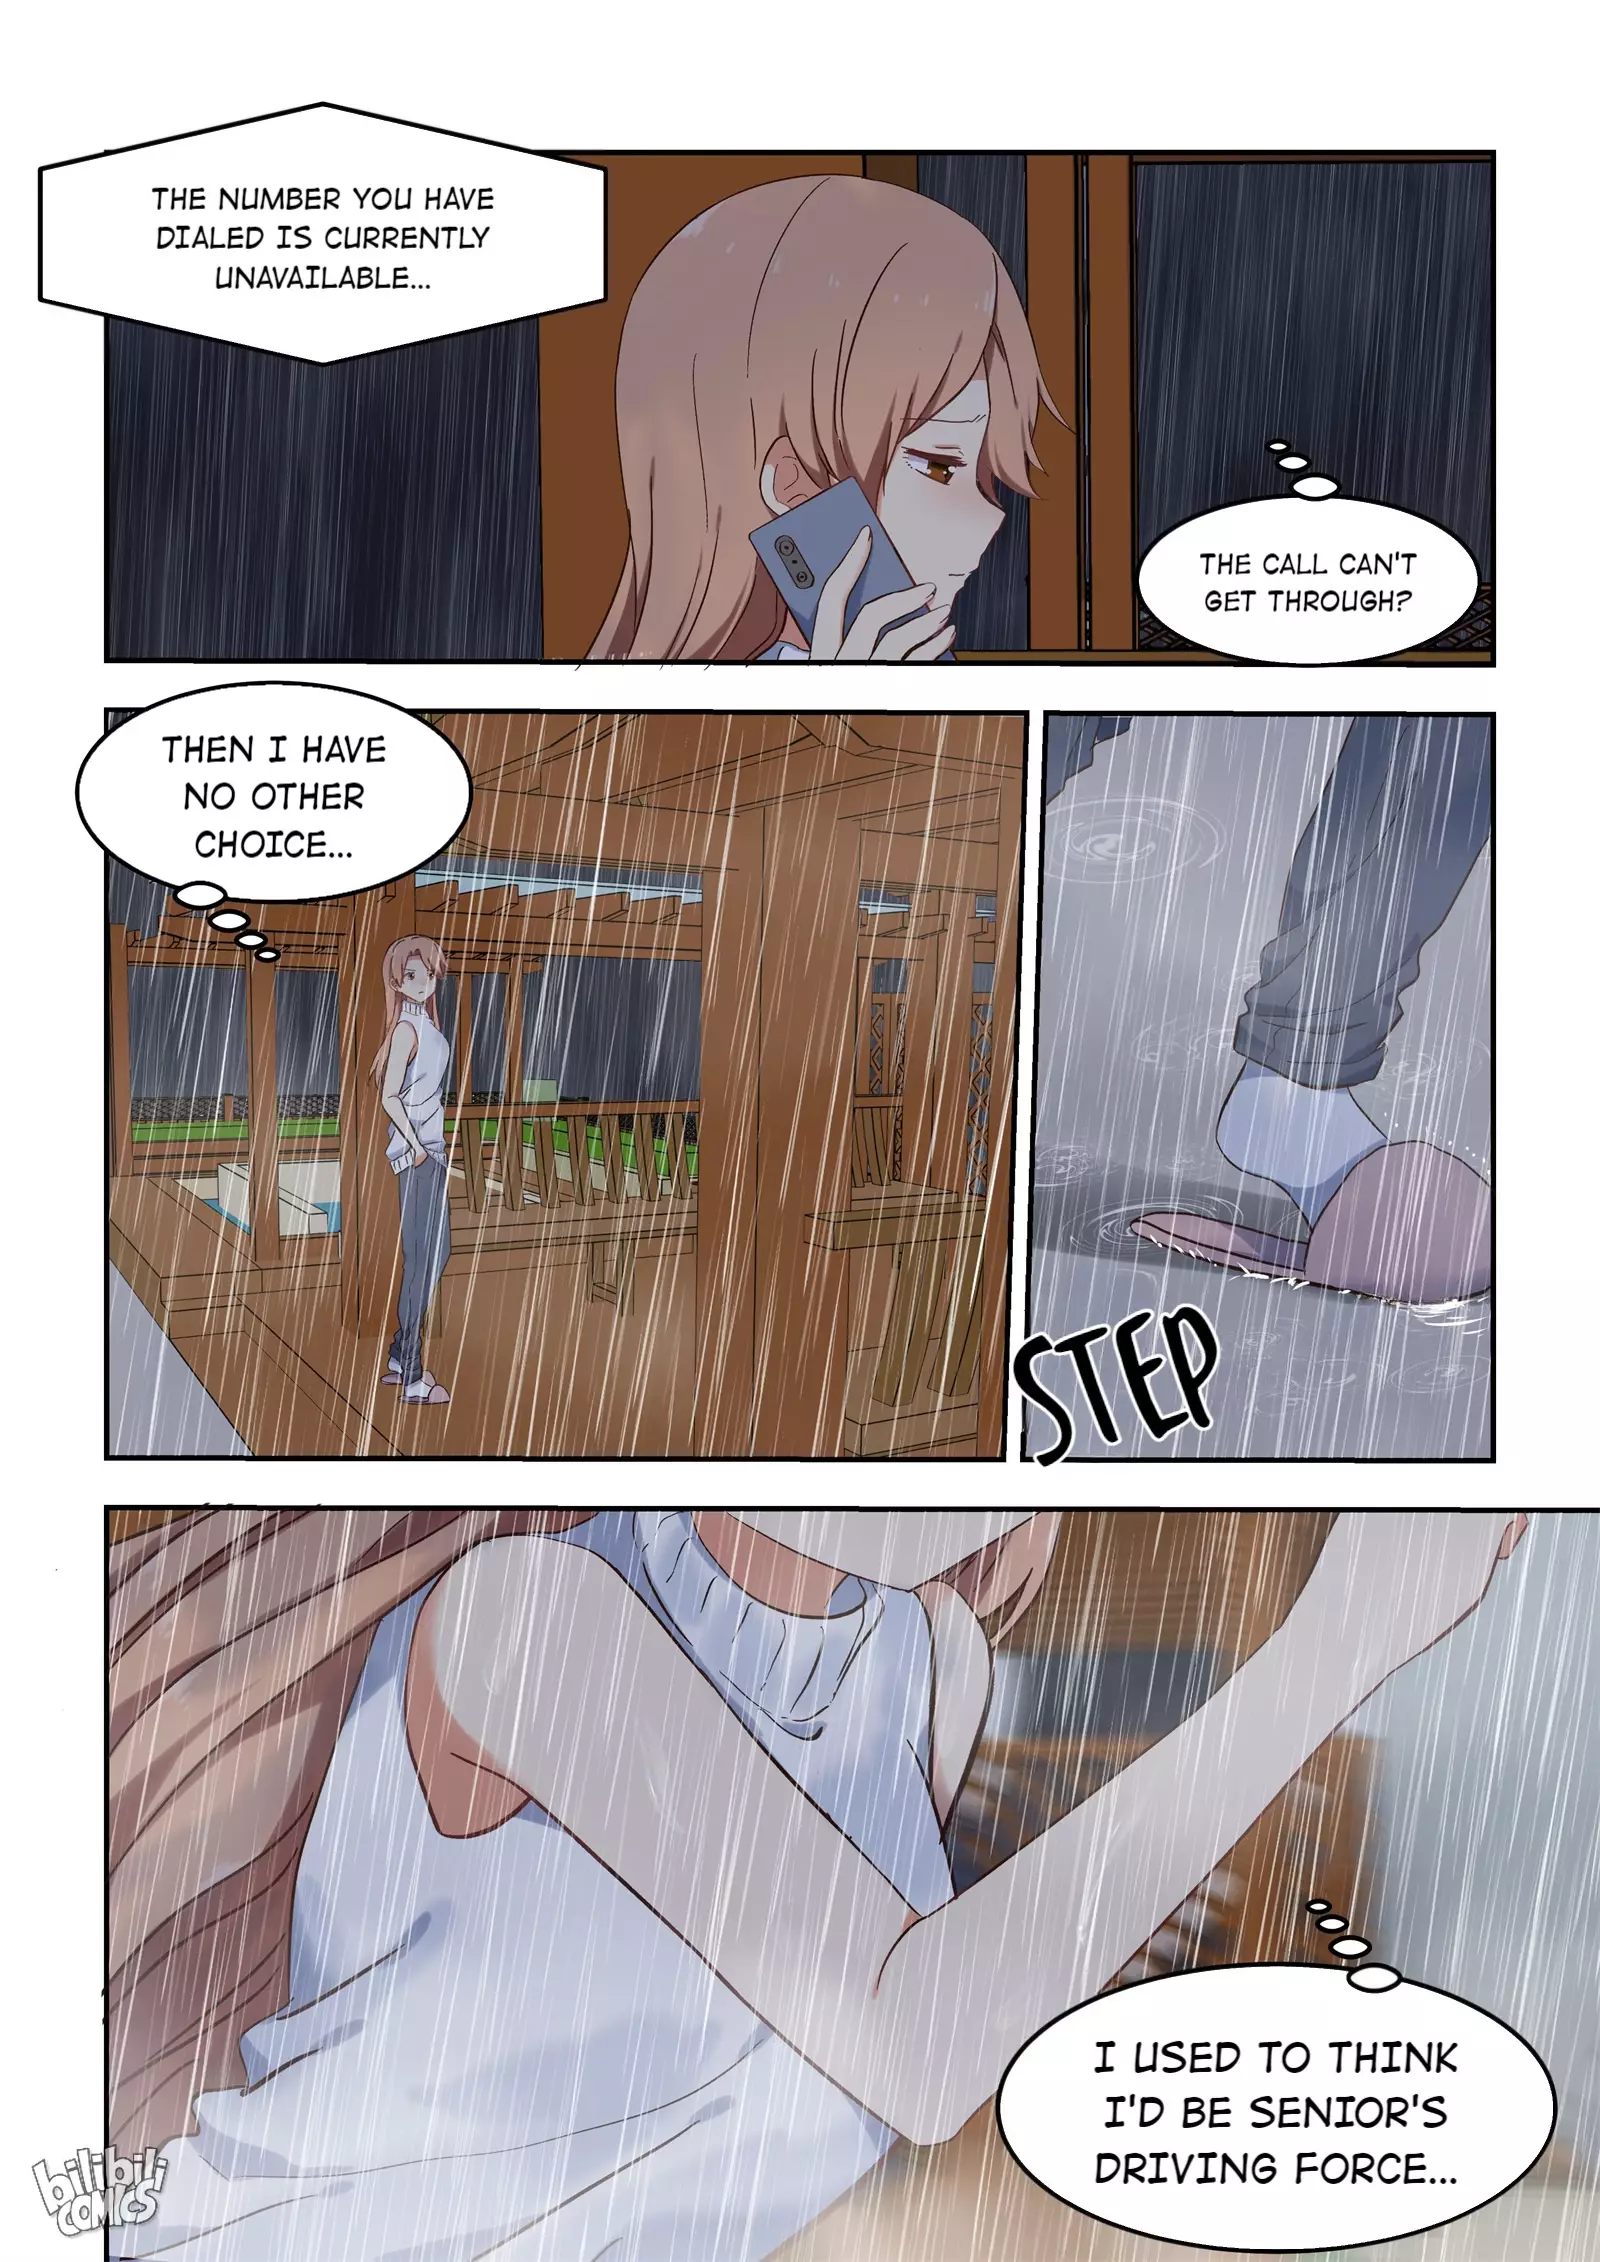 I Decided To Offer Myself To Motivate Senpai - 118 page 3-20b29bfc